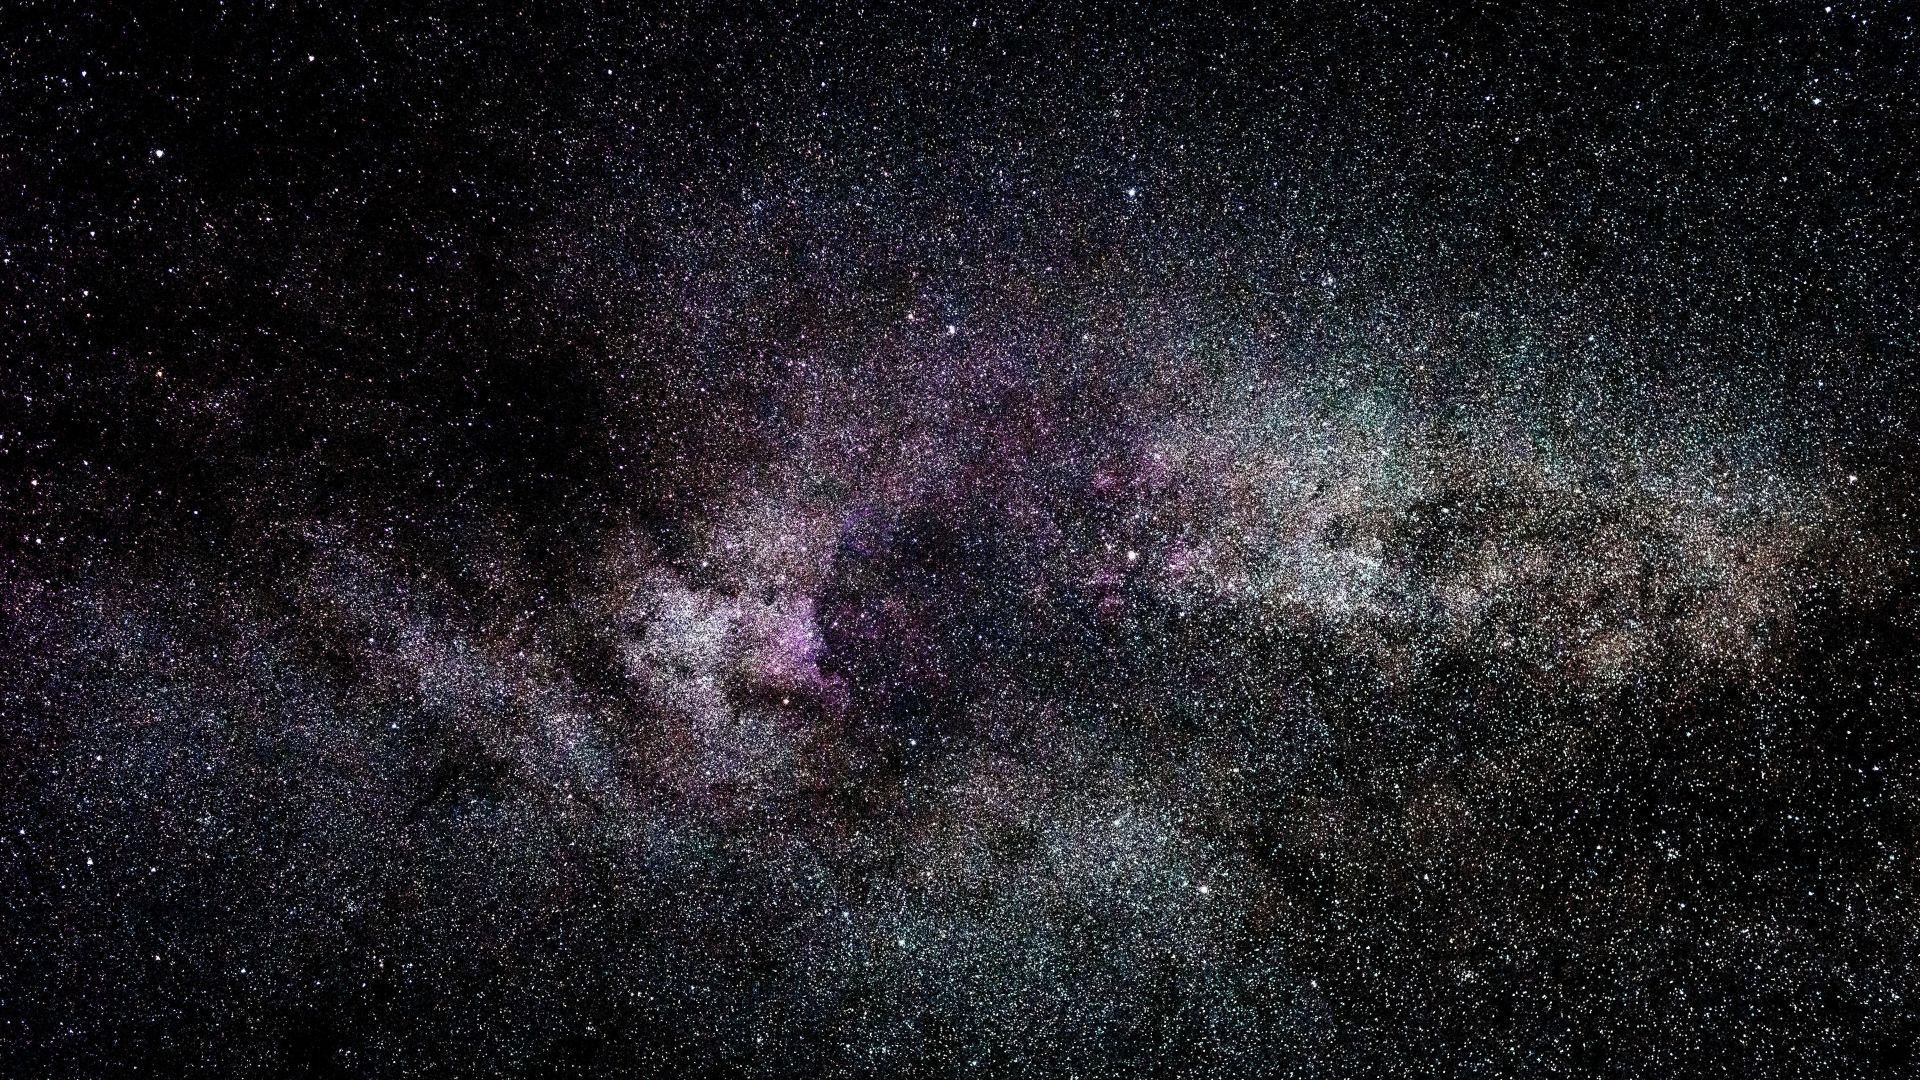 Desktop wallpaper cosmos, colorful, clouds, dark, space, HD image, picture, background, a37c5b